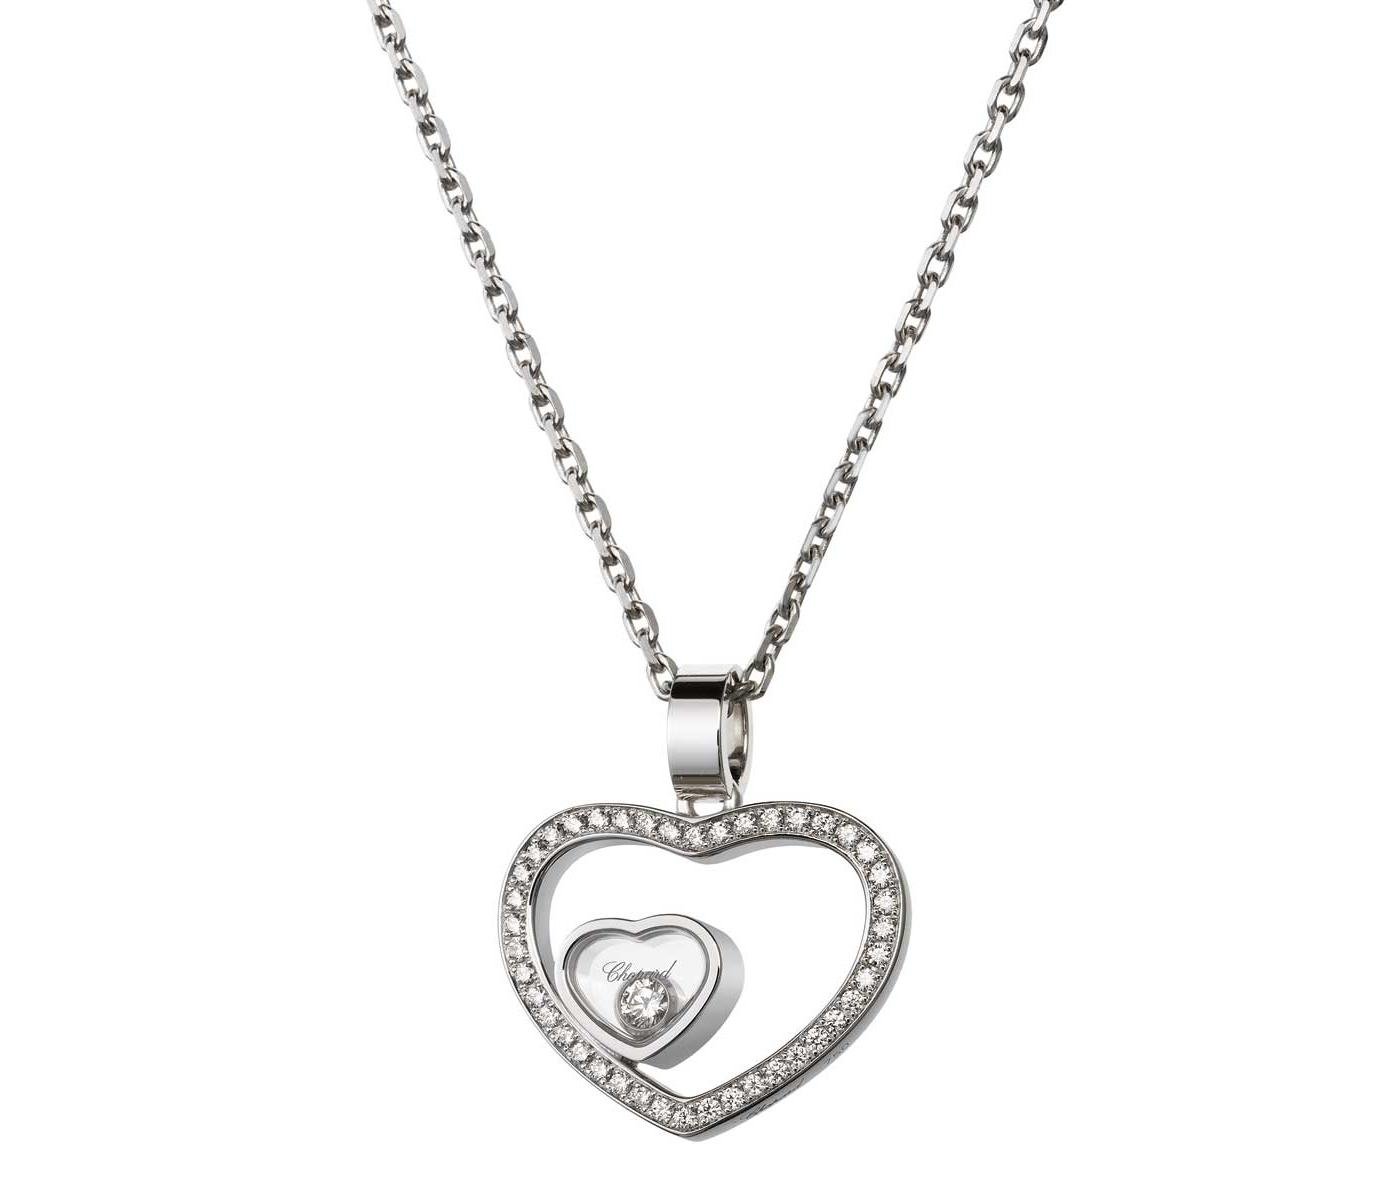 Pendant by Chopard